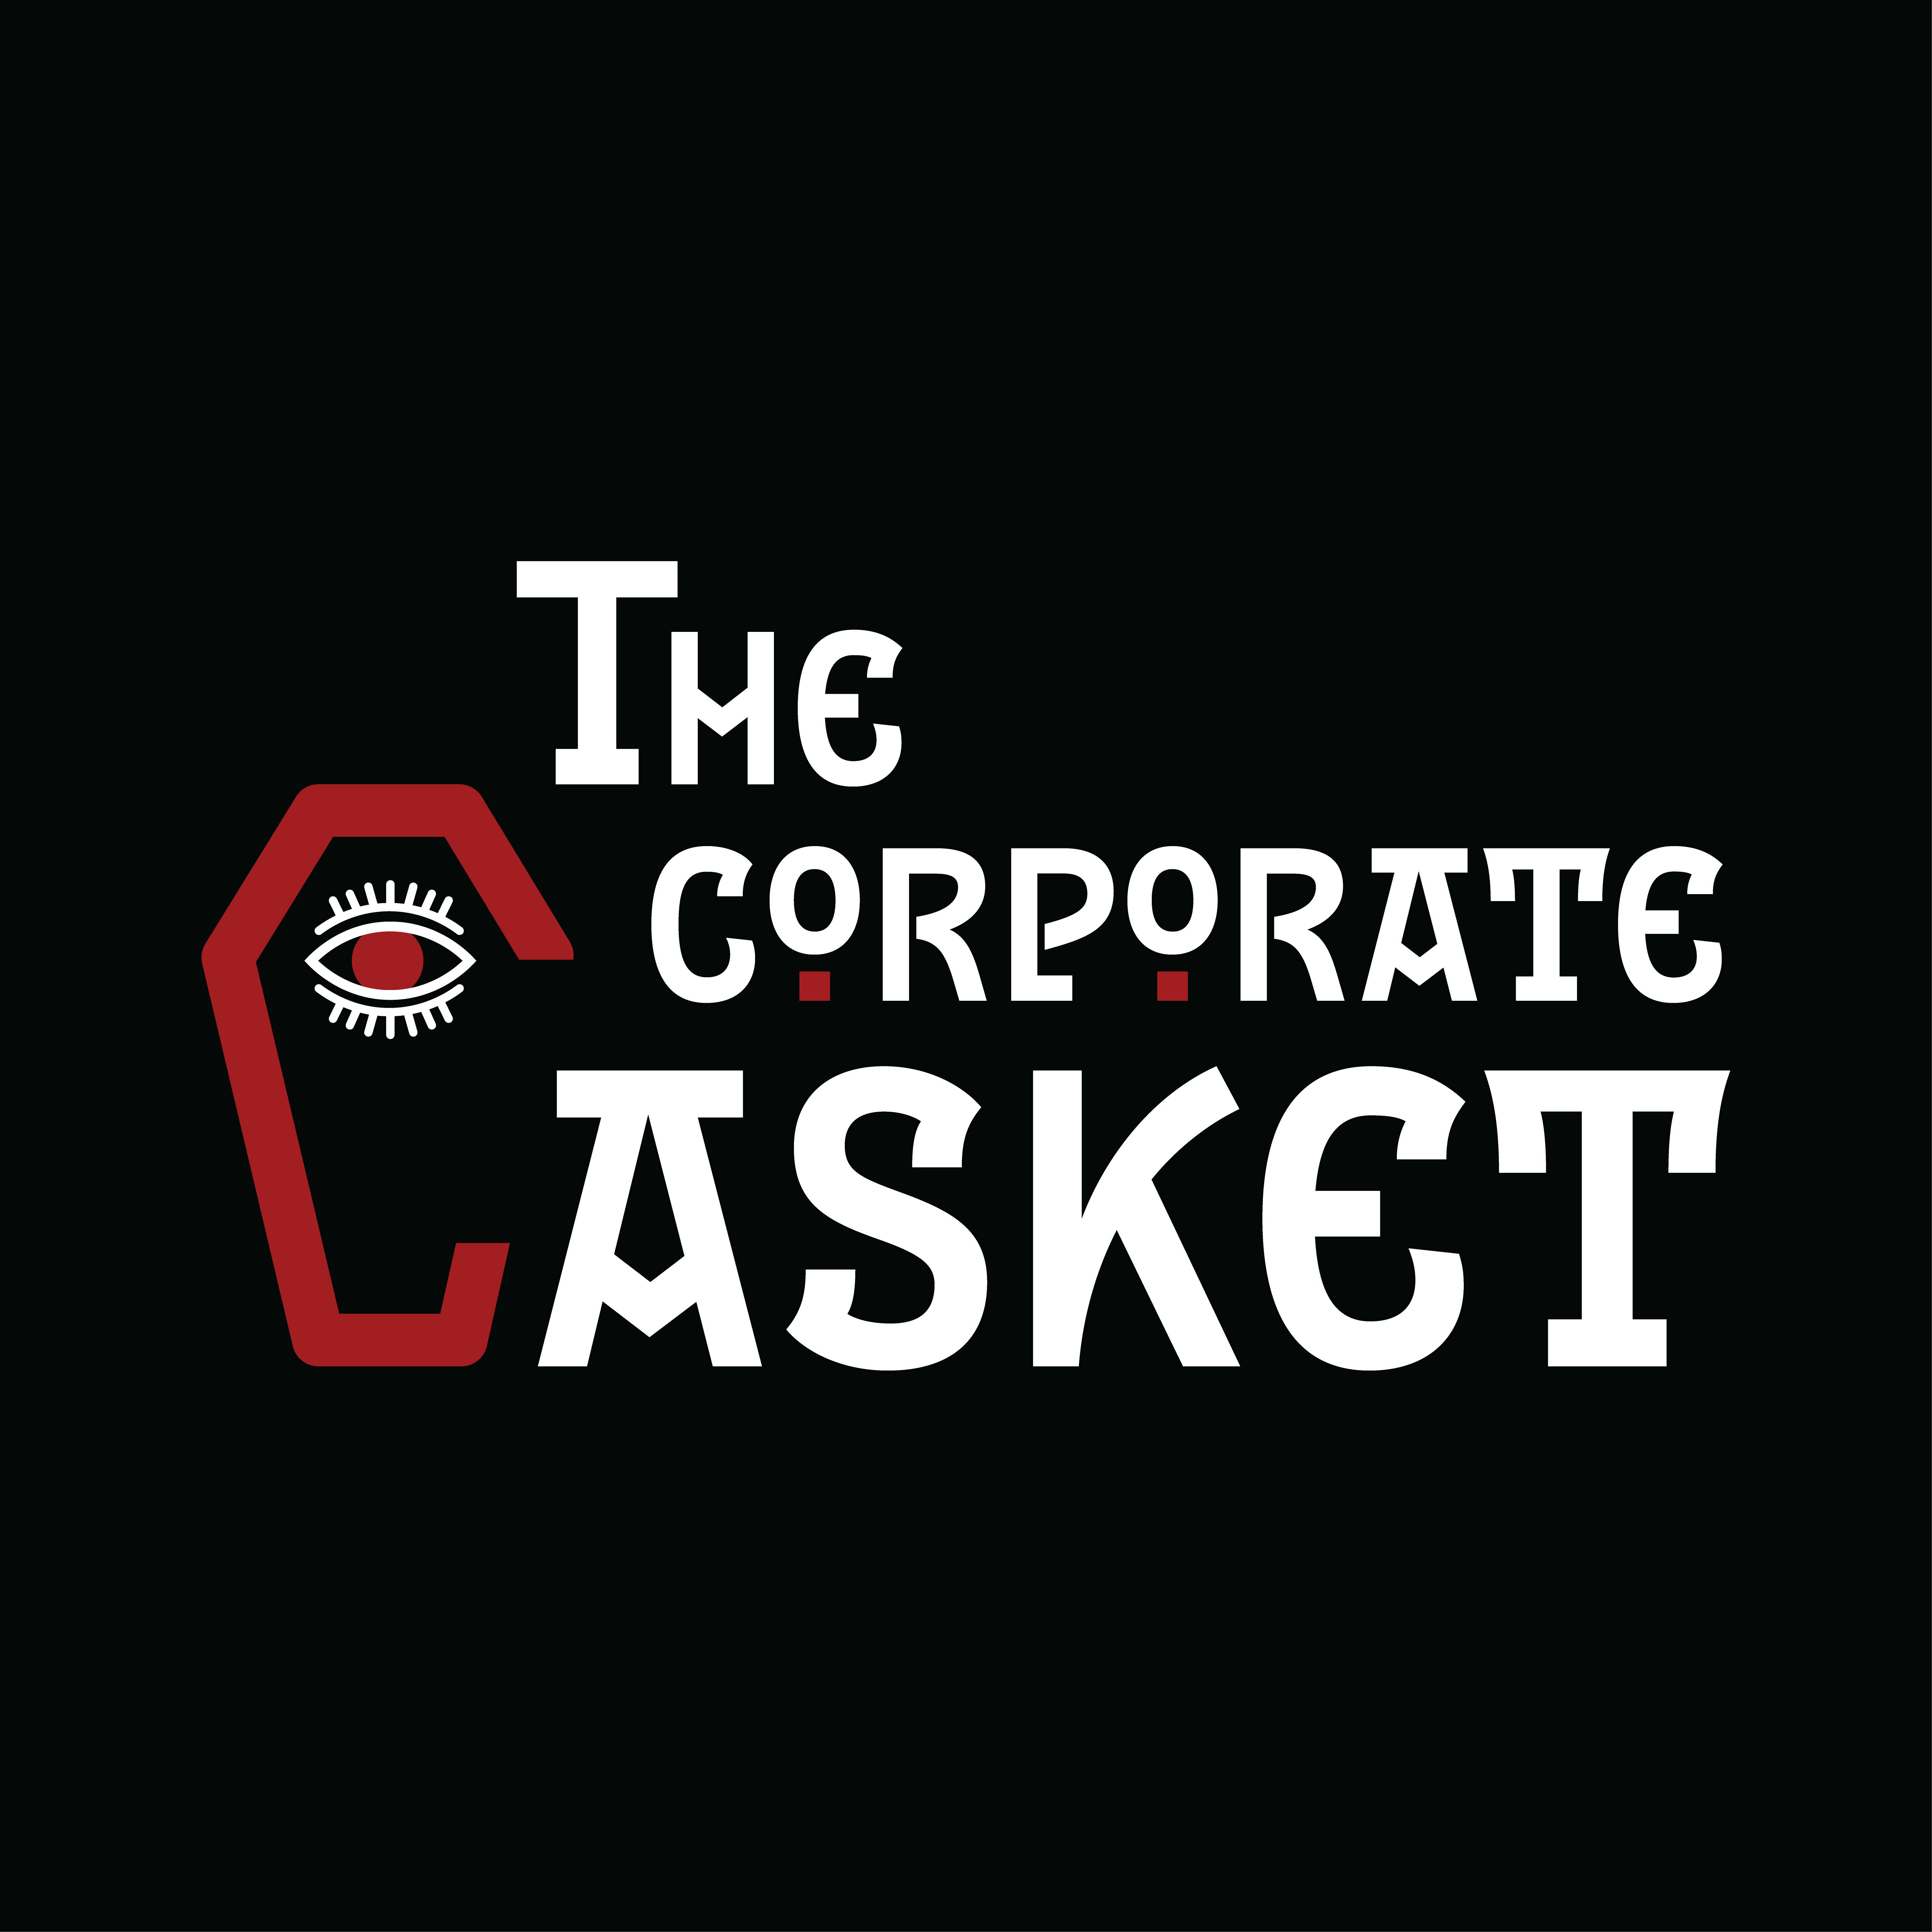 Uncovering the Dark Meat Behind Tyson | Corporate Casket